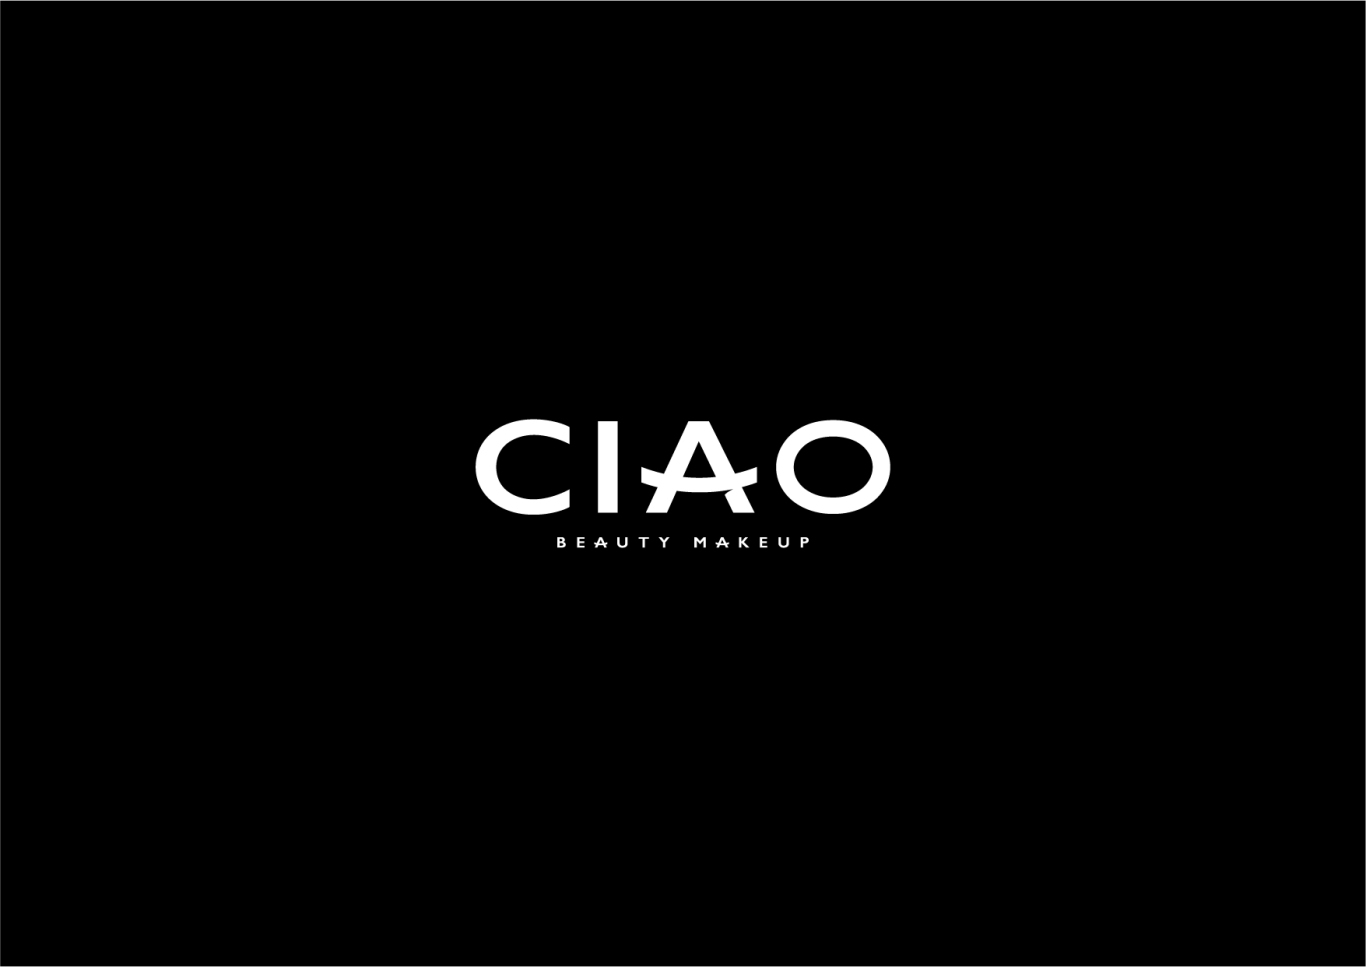 Ciao美妆logo设计图1